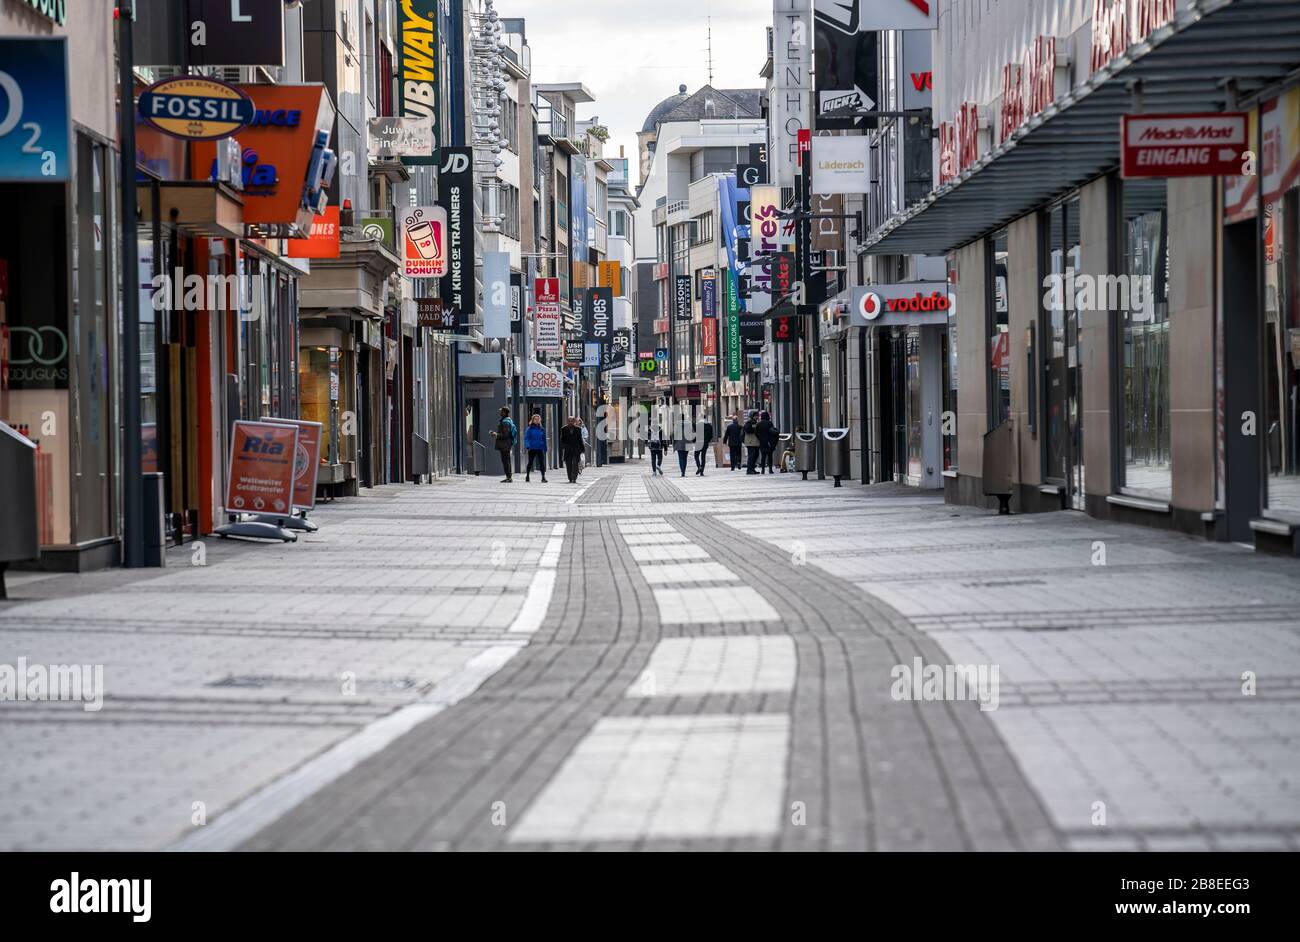 Effects of the coronavirus crisis, empty shopping street, around 1400h on Saturday, usually thousands of people go shopping here at this time, Hohe St Stock Photo